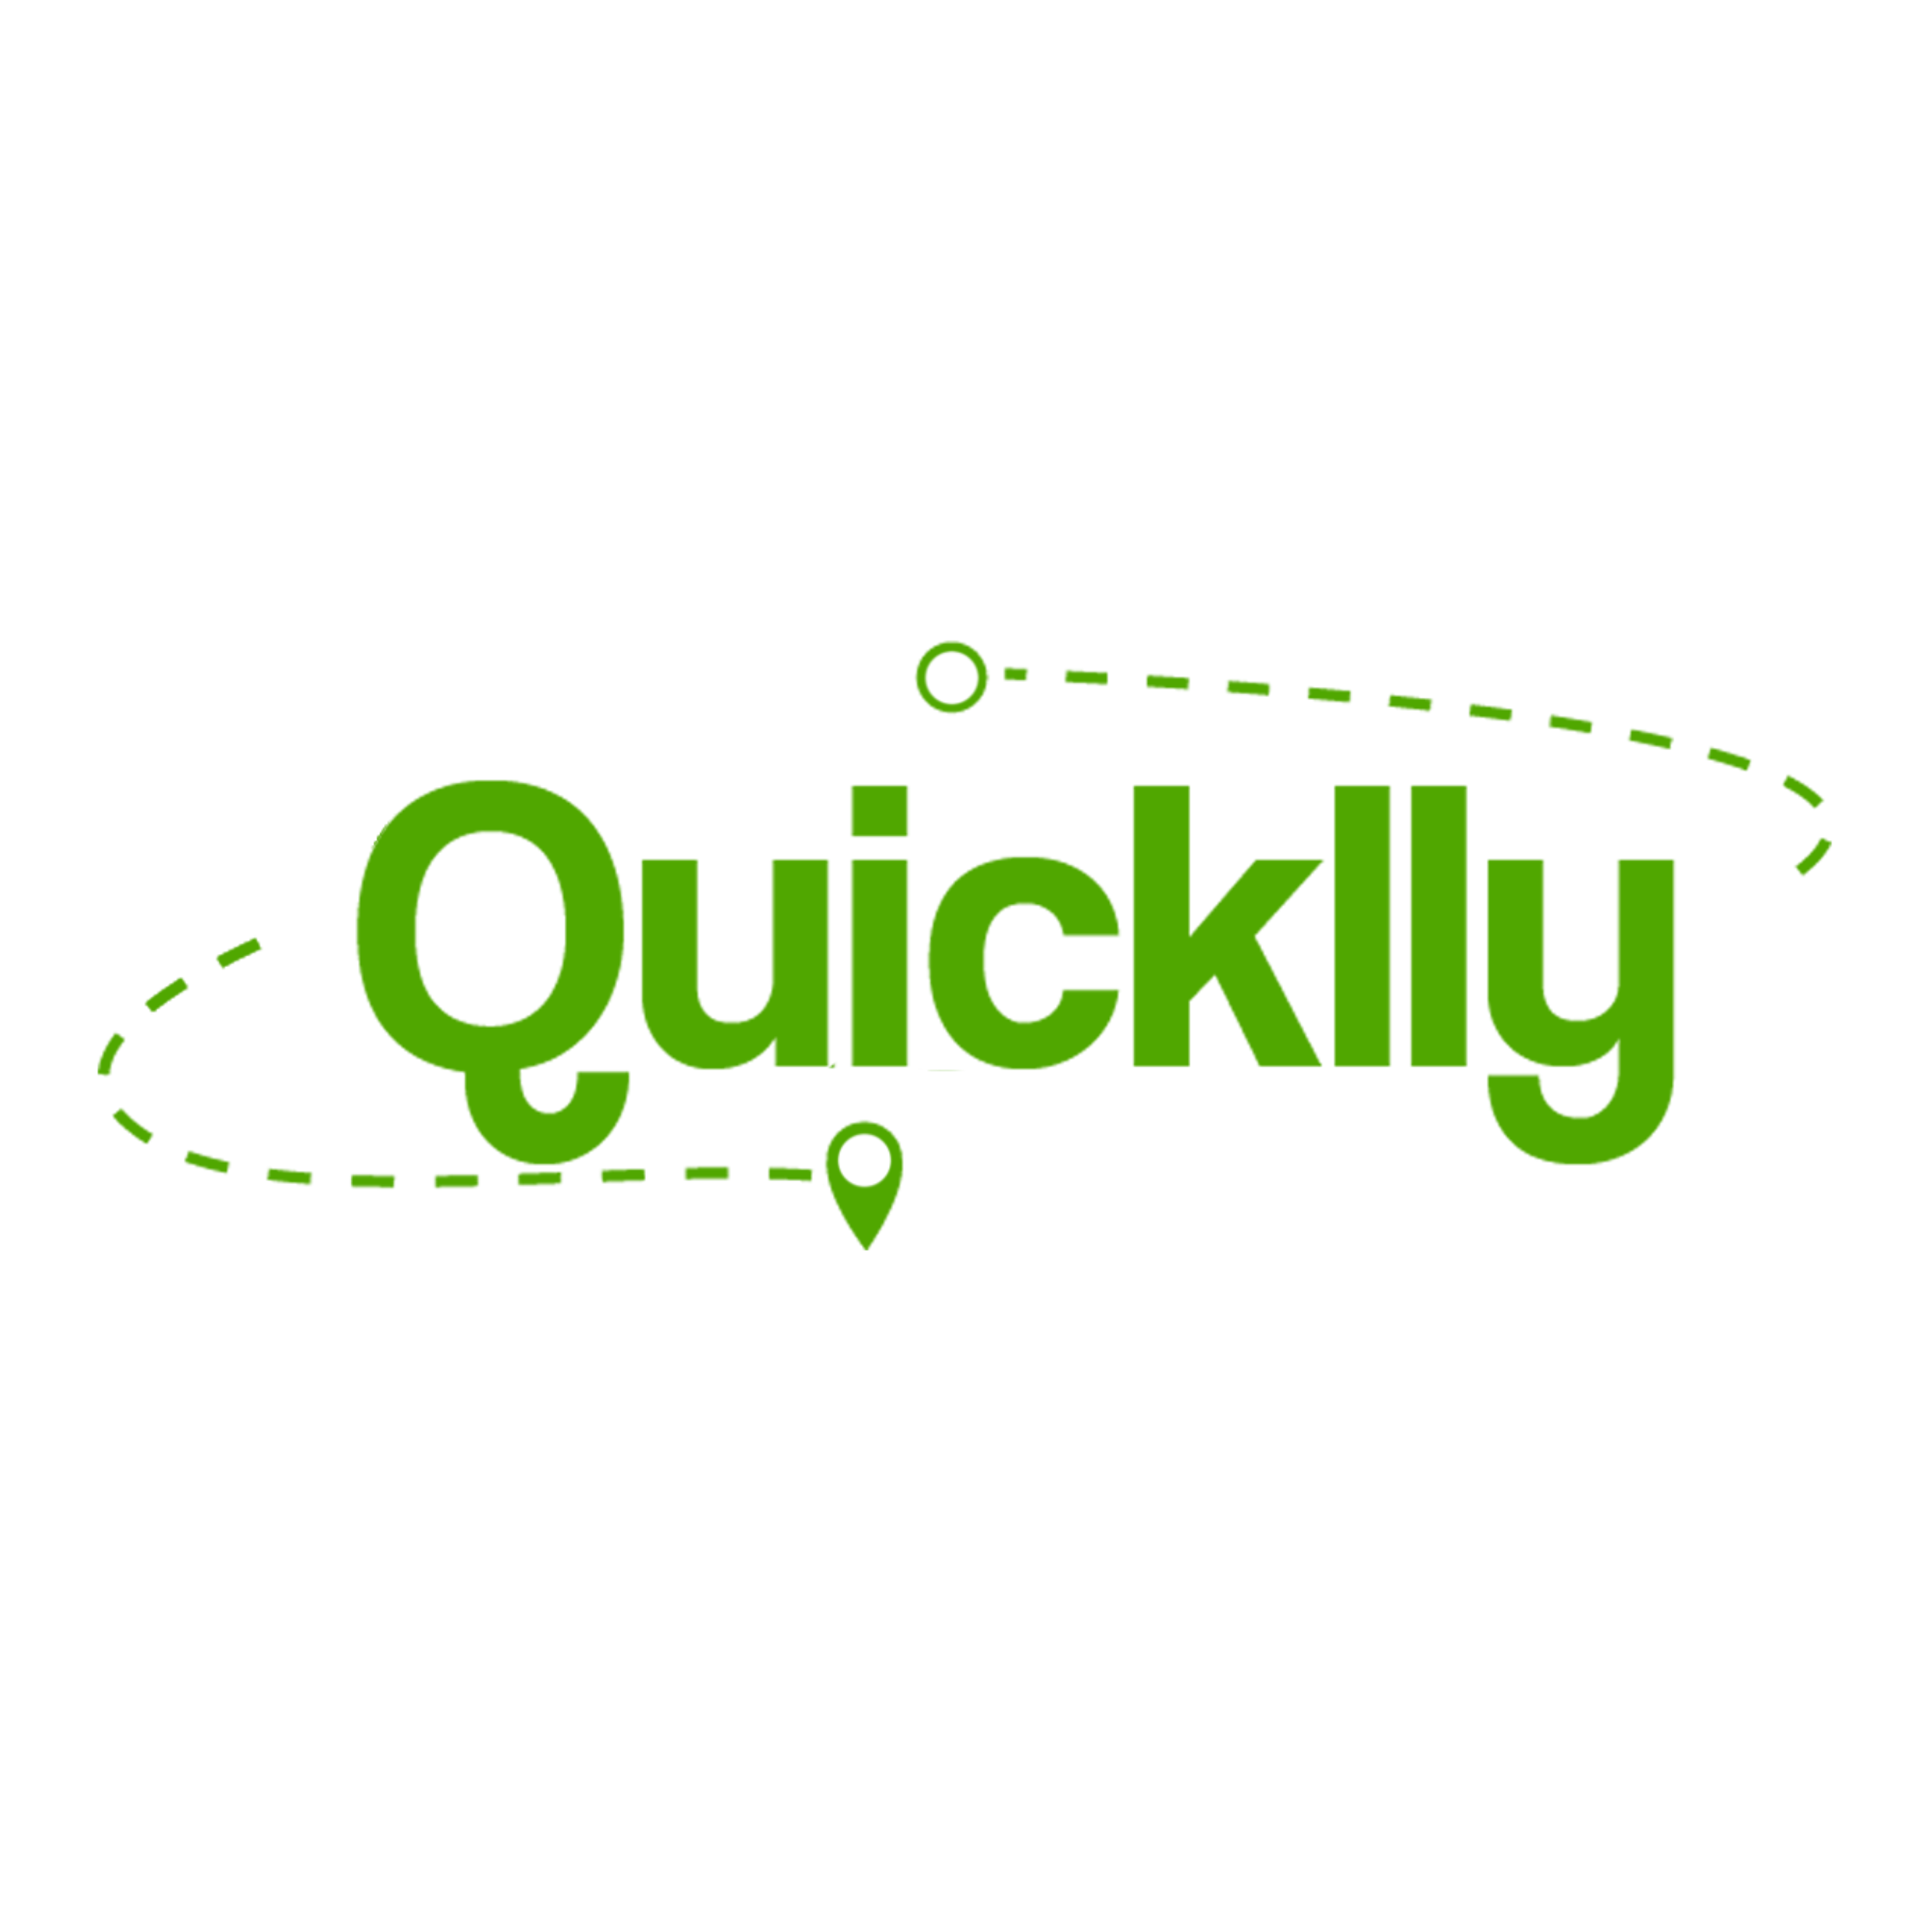 Quicklly Coupon Codes